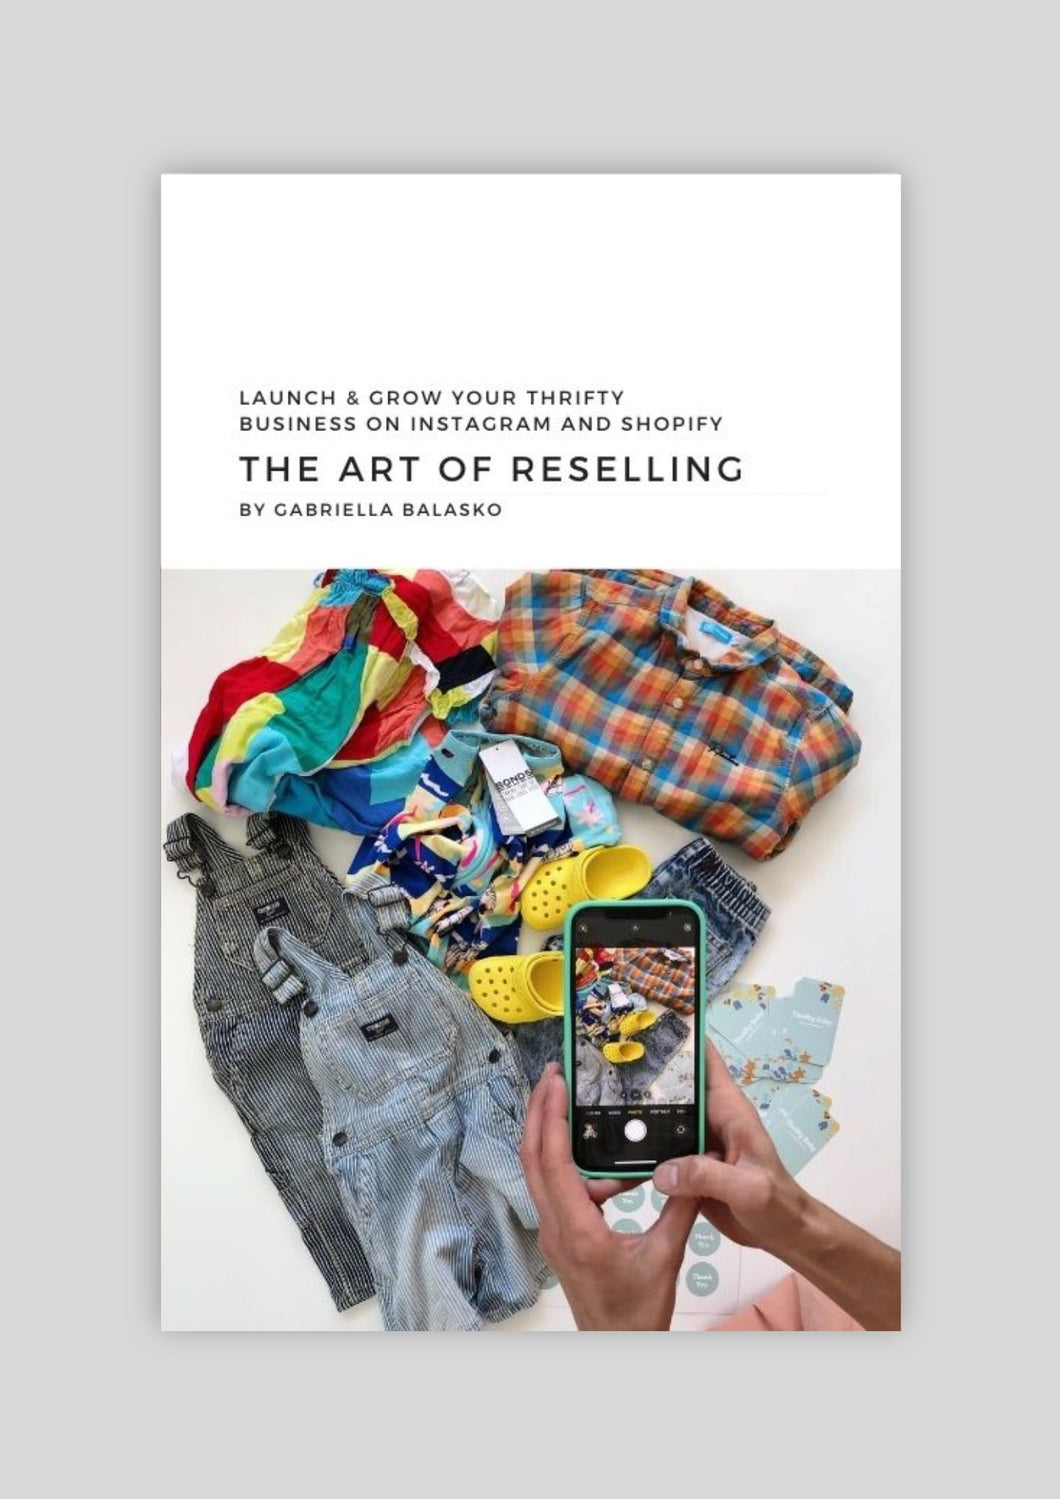 The Art of Reselling